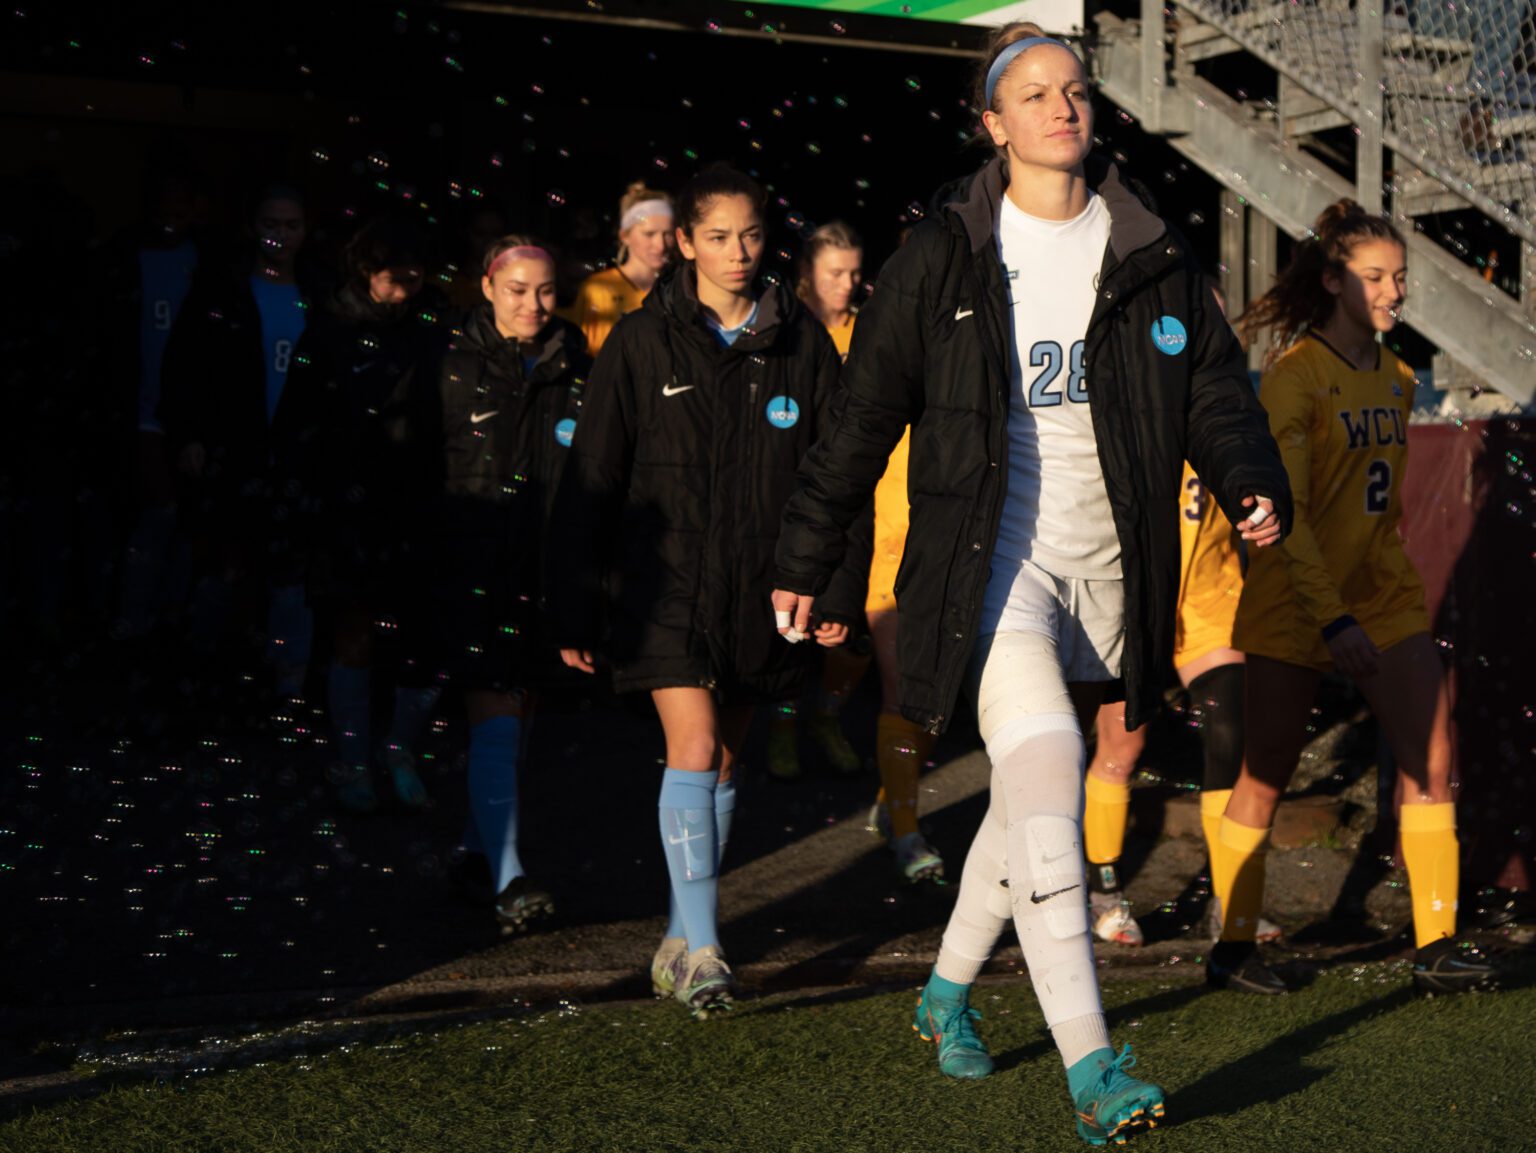 Western junior keeper Claire Henninger leads the team onto the field before the start of the NCAA Division II National Championship match versus West Chester at Interbay Stadium in Seattle on Dec. 3.